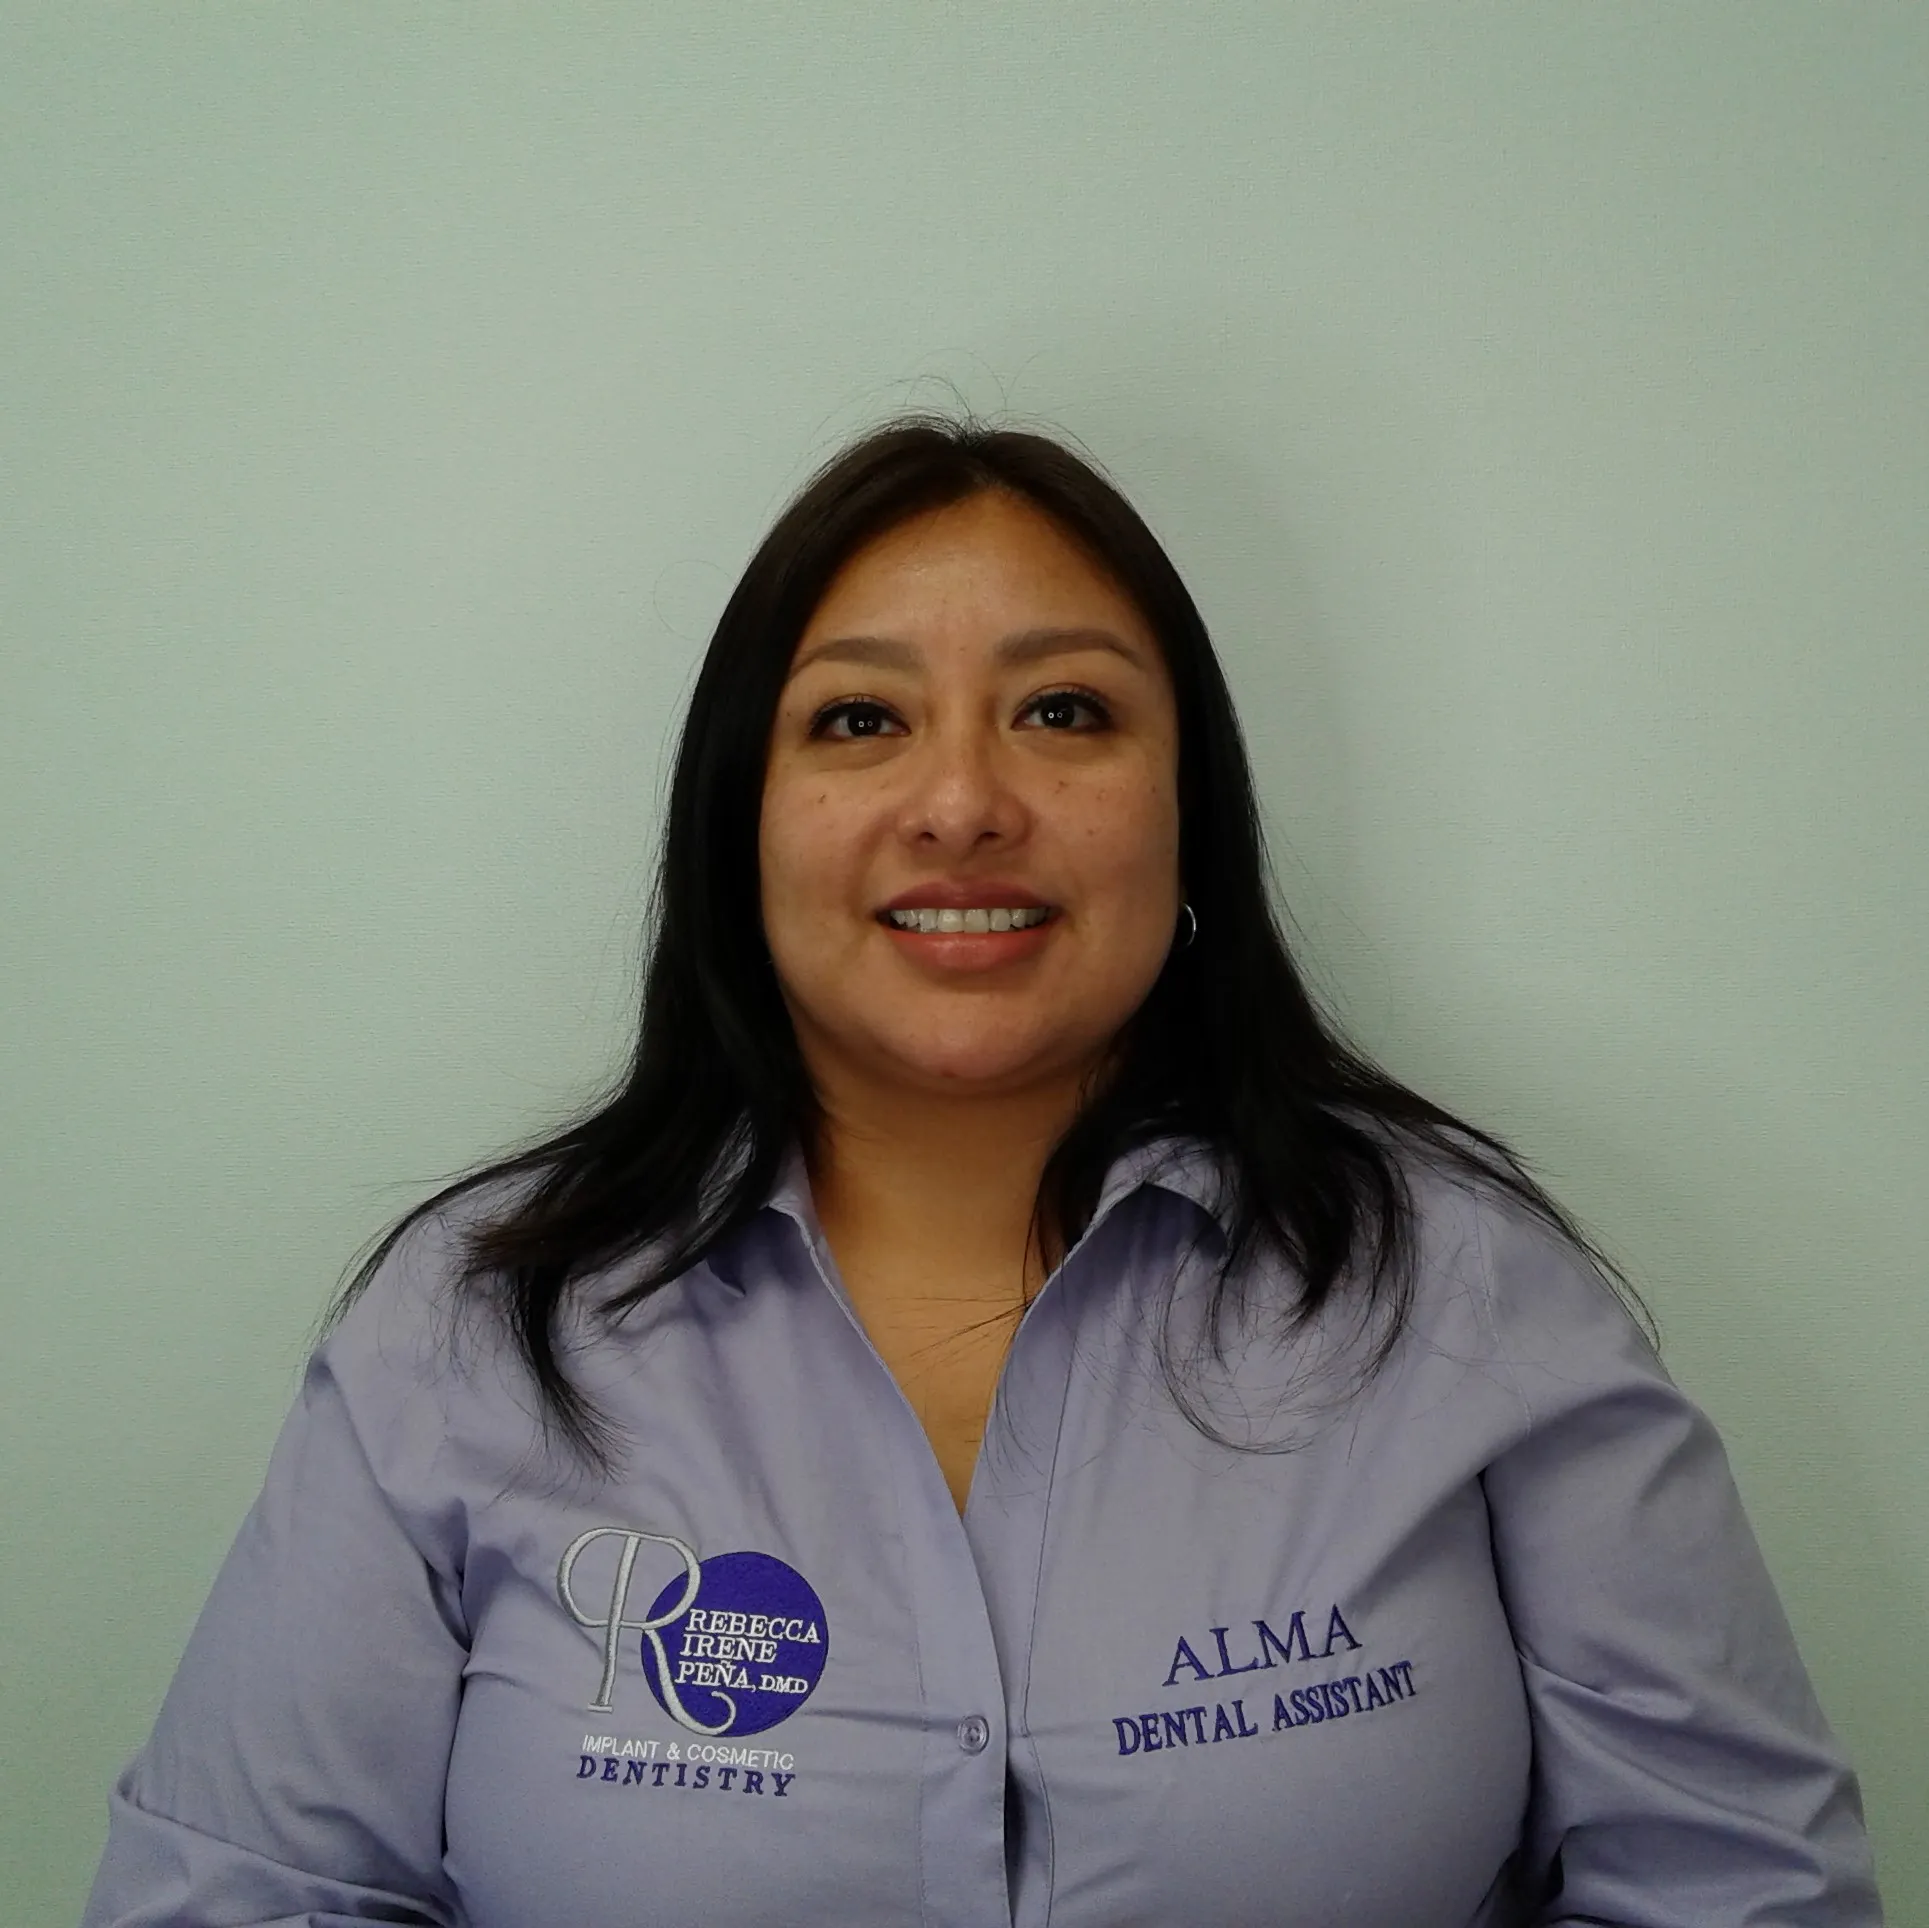 Alma – Chairside Dental Assistant at Rebecca Irene A. Peña, DMD's practice